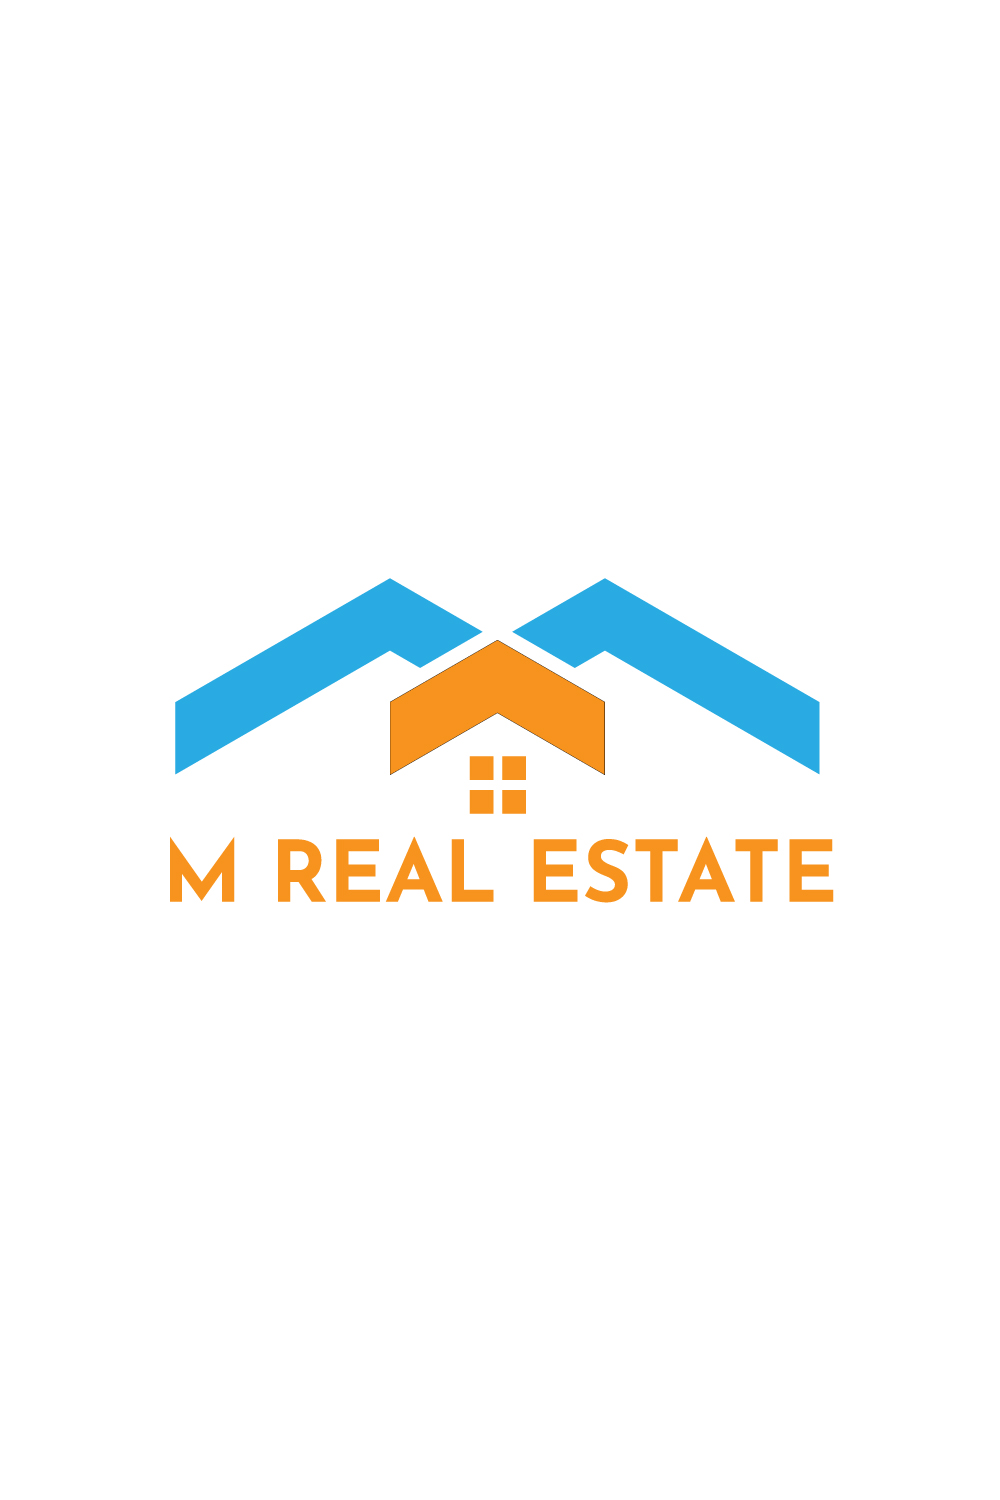 Introducing the "Minimal M Real Estate Logo" Bundle - A Symbol of Simplicity and Professionalism pinterest preview image.